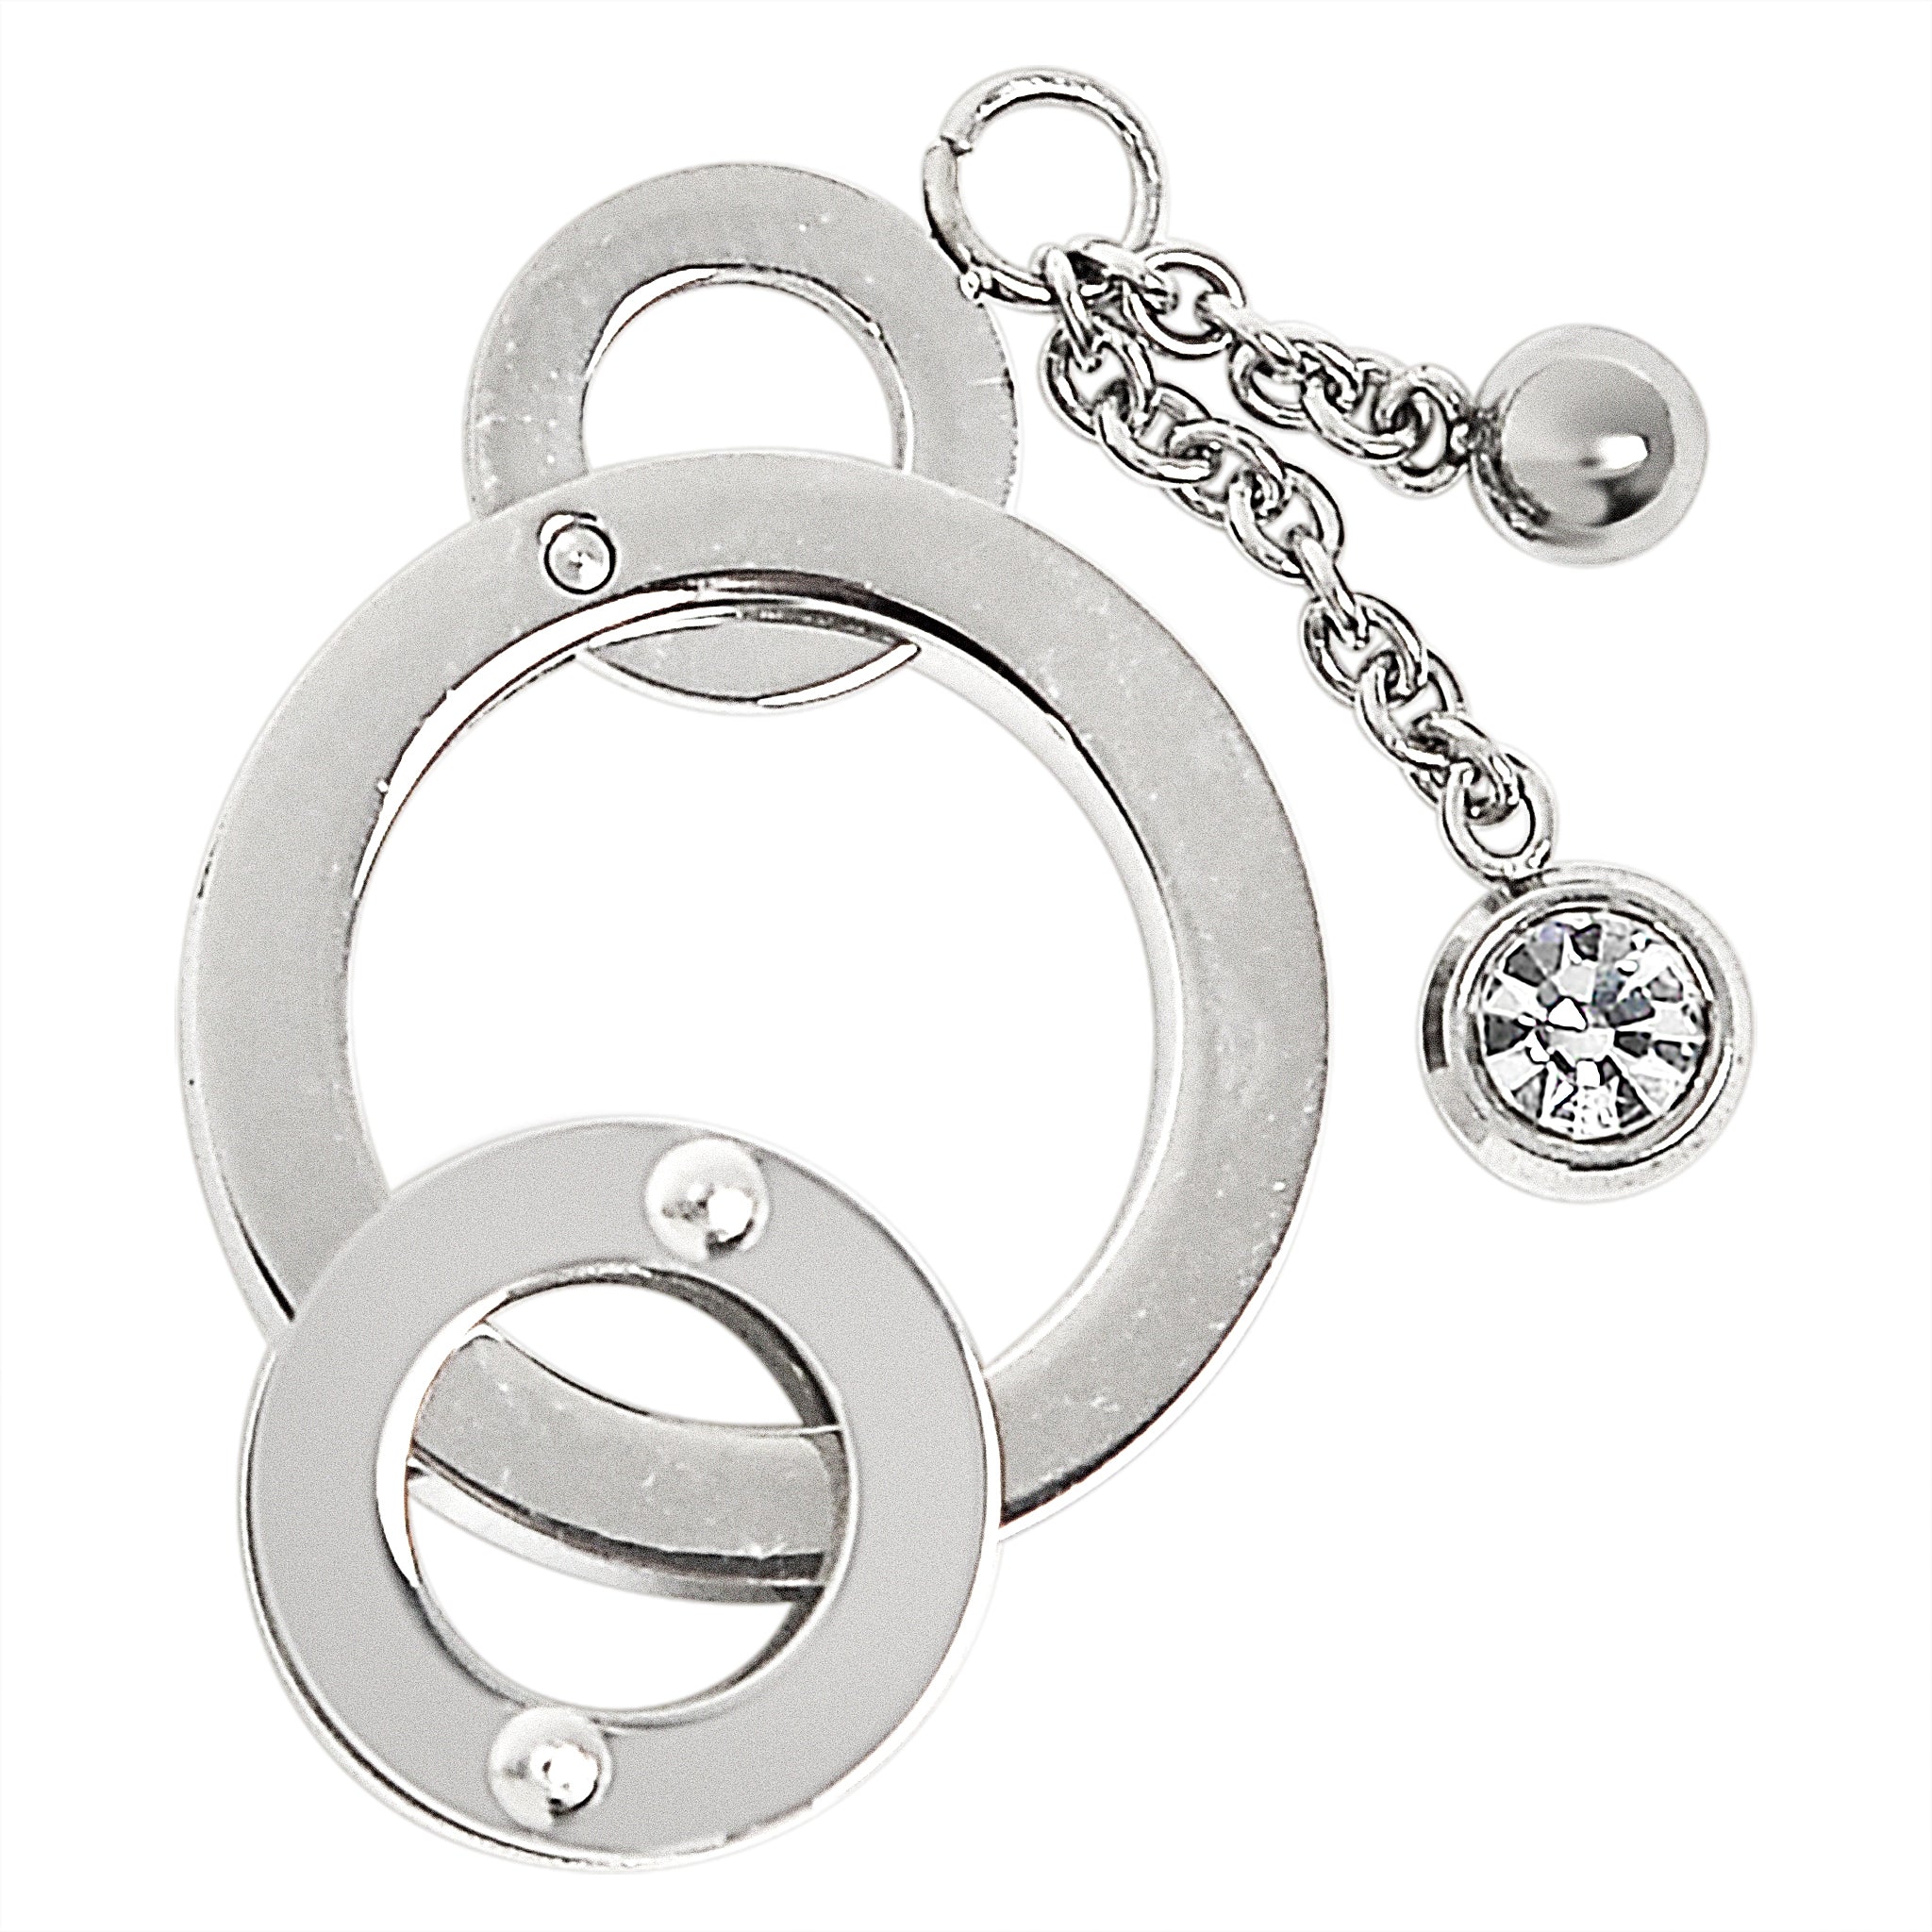 Stainless steel round rings with chain Cubic Zirconia pendant.